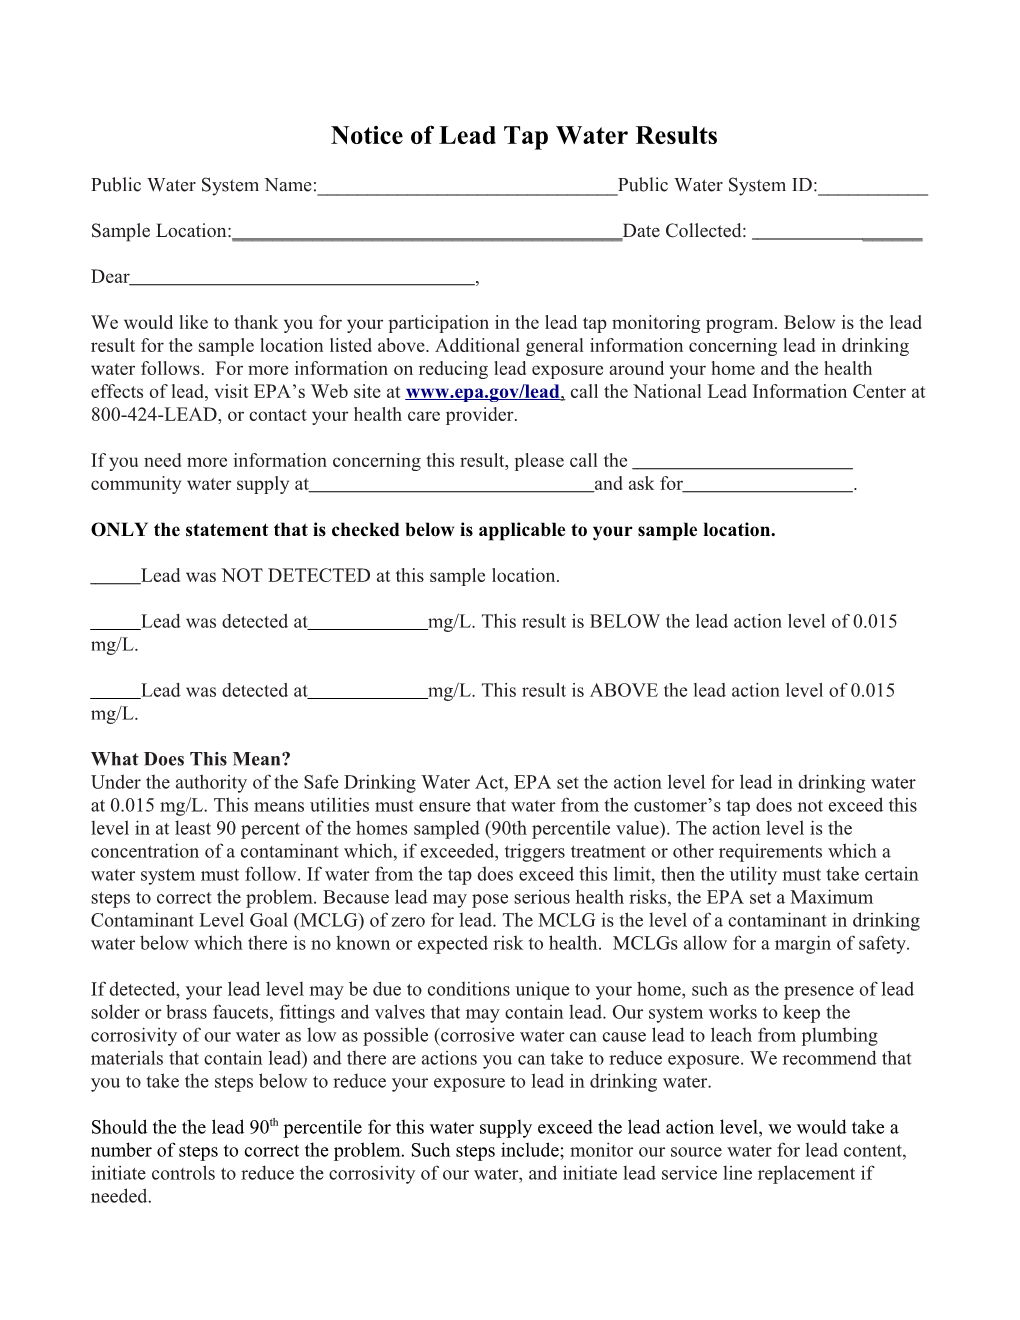 LCR Consumer Notification Form